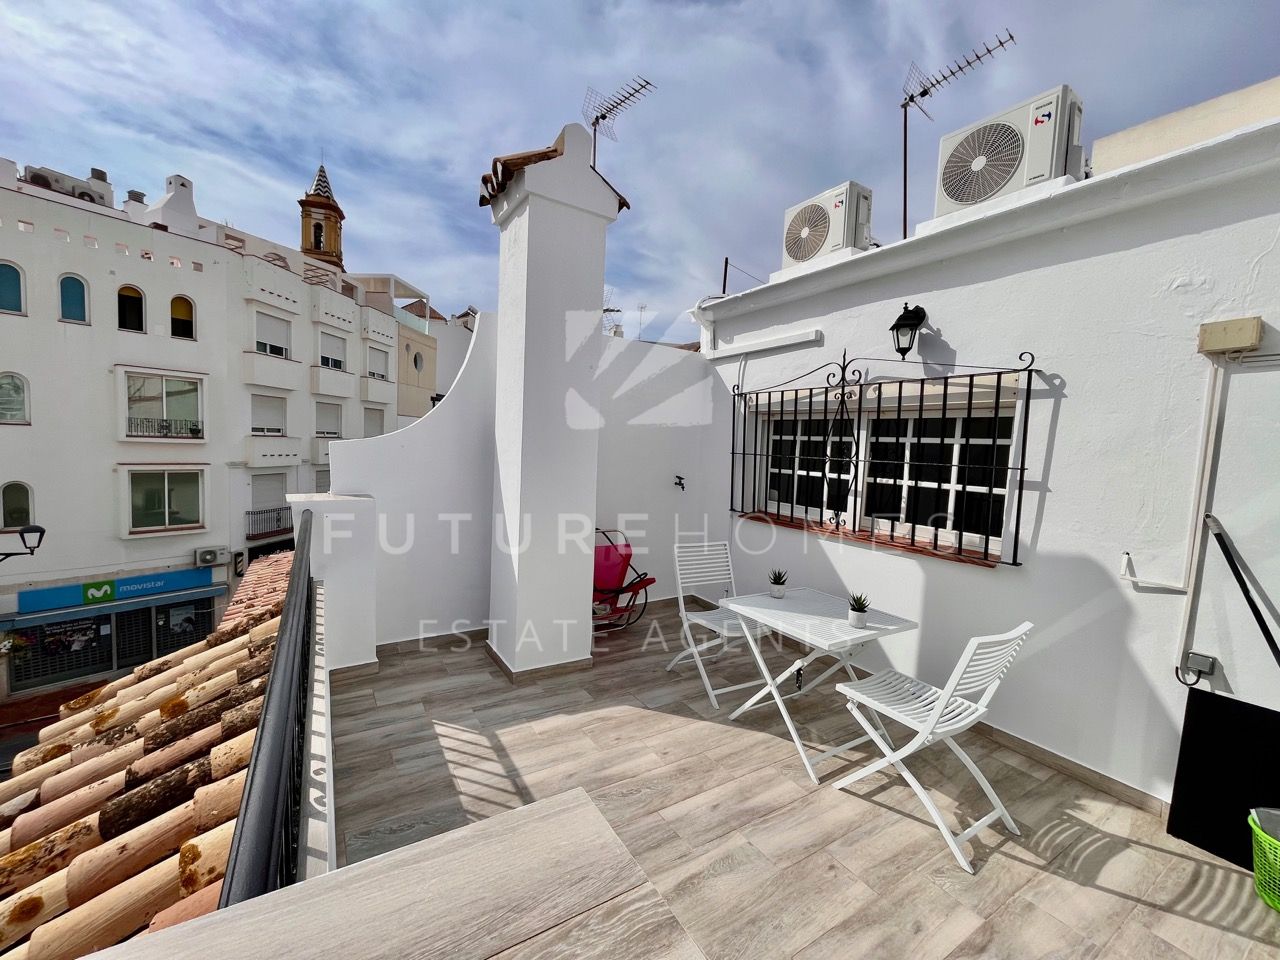 Townhouse for sale in the heart of Estepona old town with business premises included! 